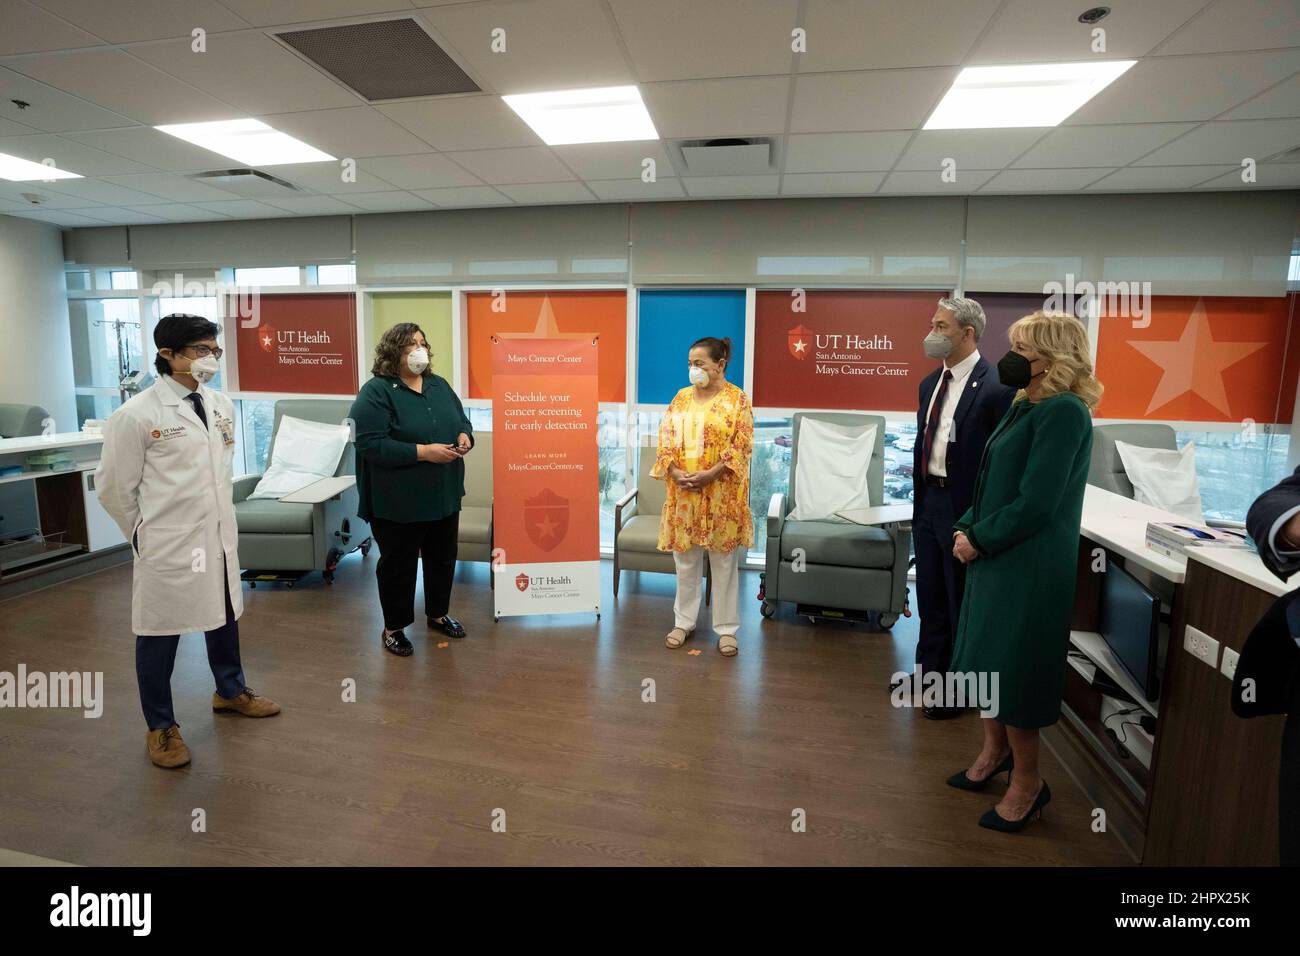 San Antonio Texas USA, Feb. 23, 2022: U.S. First Lady JILL BIDEN (far right) leads a discussion of doctors and researchers as she visits the Mays Cancer Center while on a tour of the UT Health MD Anderson Cancer facility. Biden listened to patients stories and heard from doctors on the front lines of cancer research. Credit: Bob Daemmrich/Alamy Live News Stock Photo